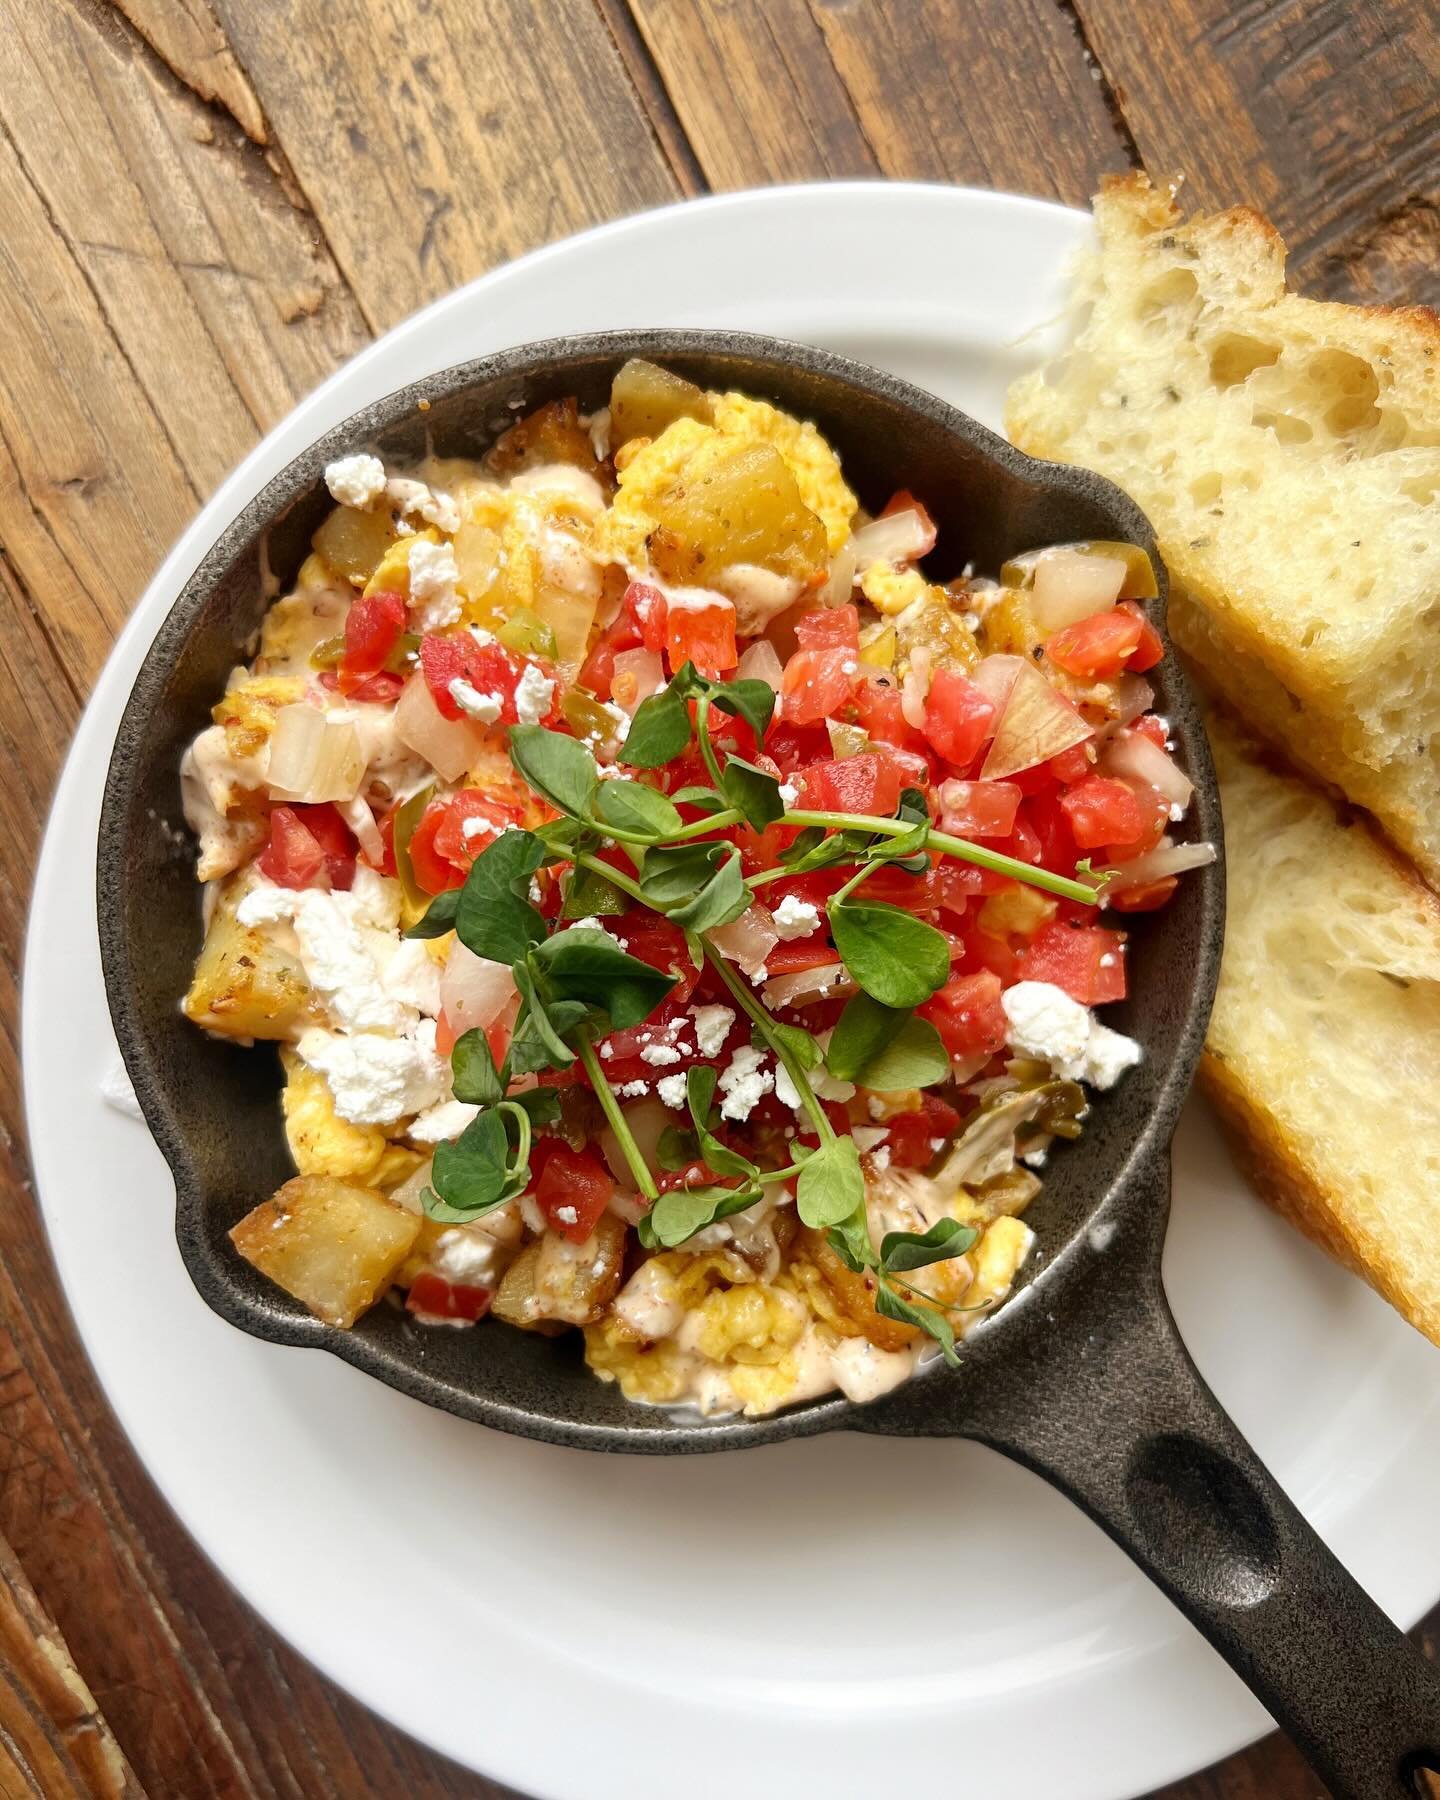 New to the spring menu &bull; Breakfast Skillet 🍳 

Seasoned potatoes with pico de gallo, scrambled eggs, southwest sauce, and feta, served with fresh Focaccia. 

#yegbrunch #yegeats #breakfastlover #brunchtime